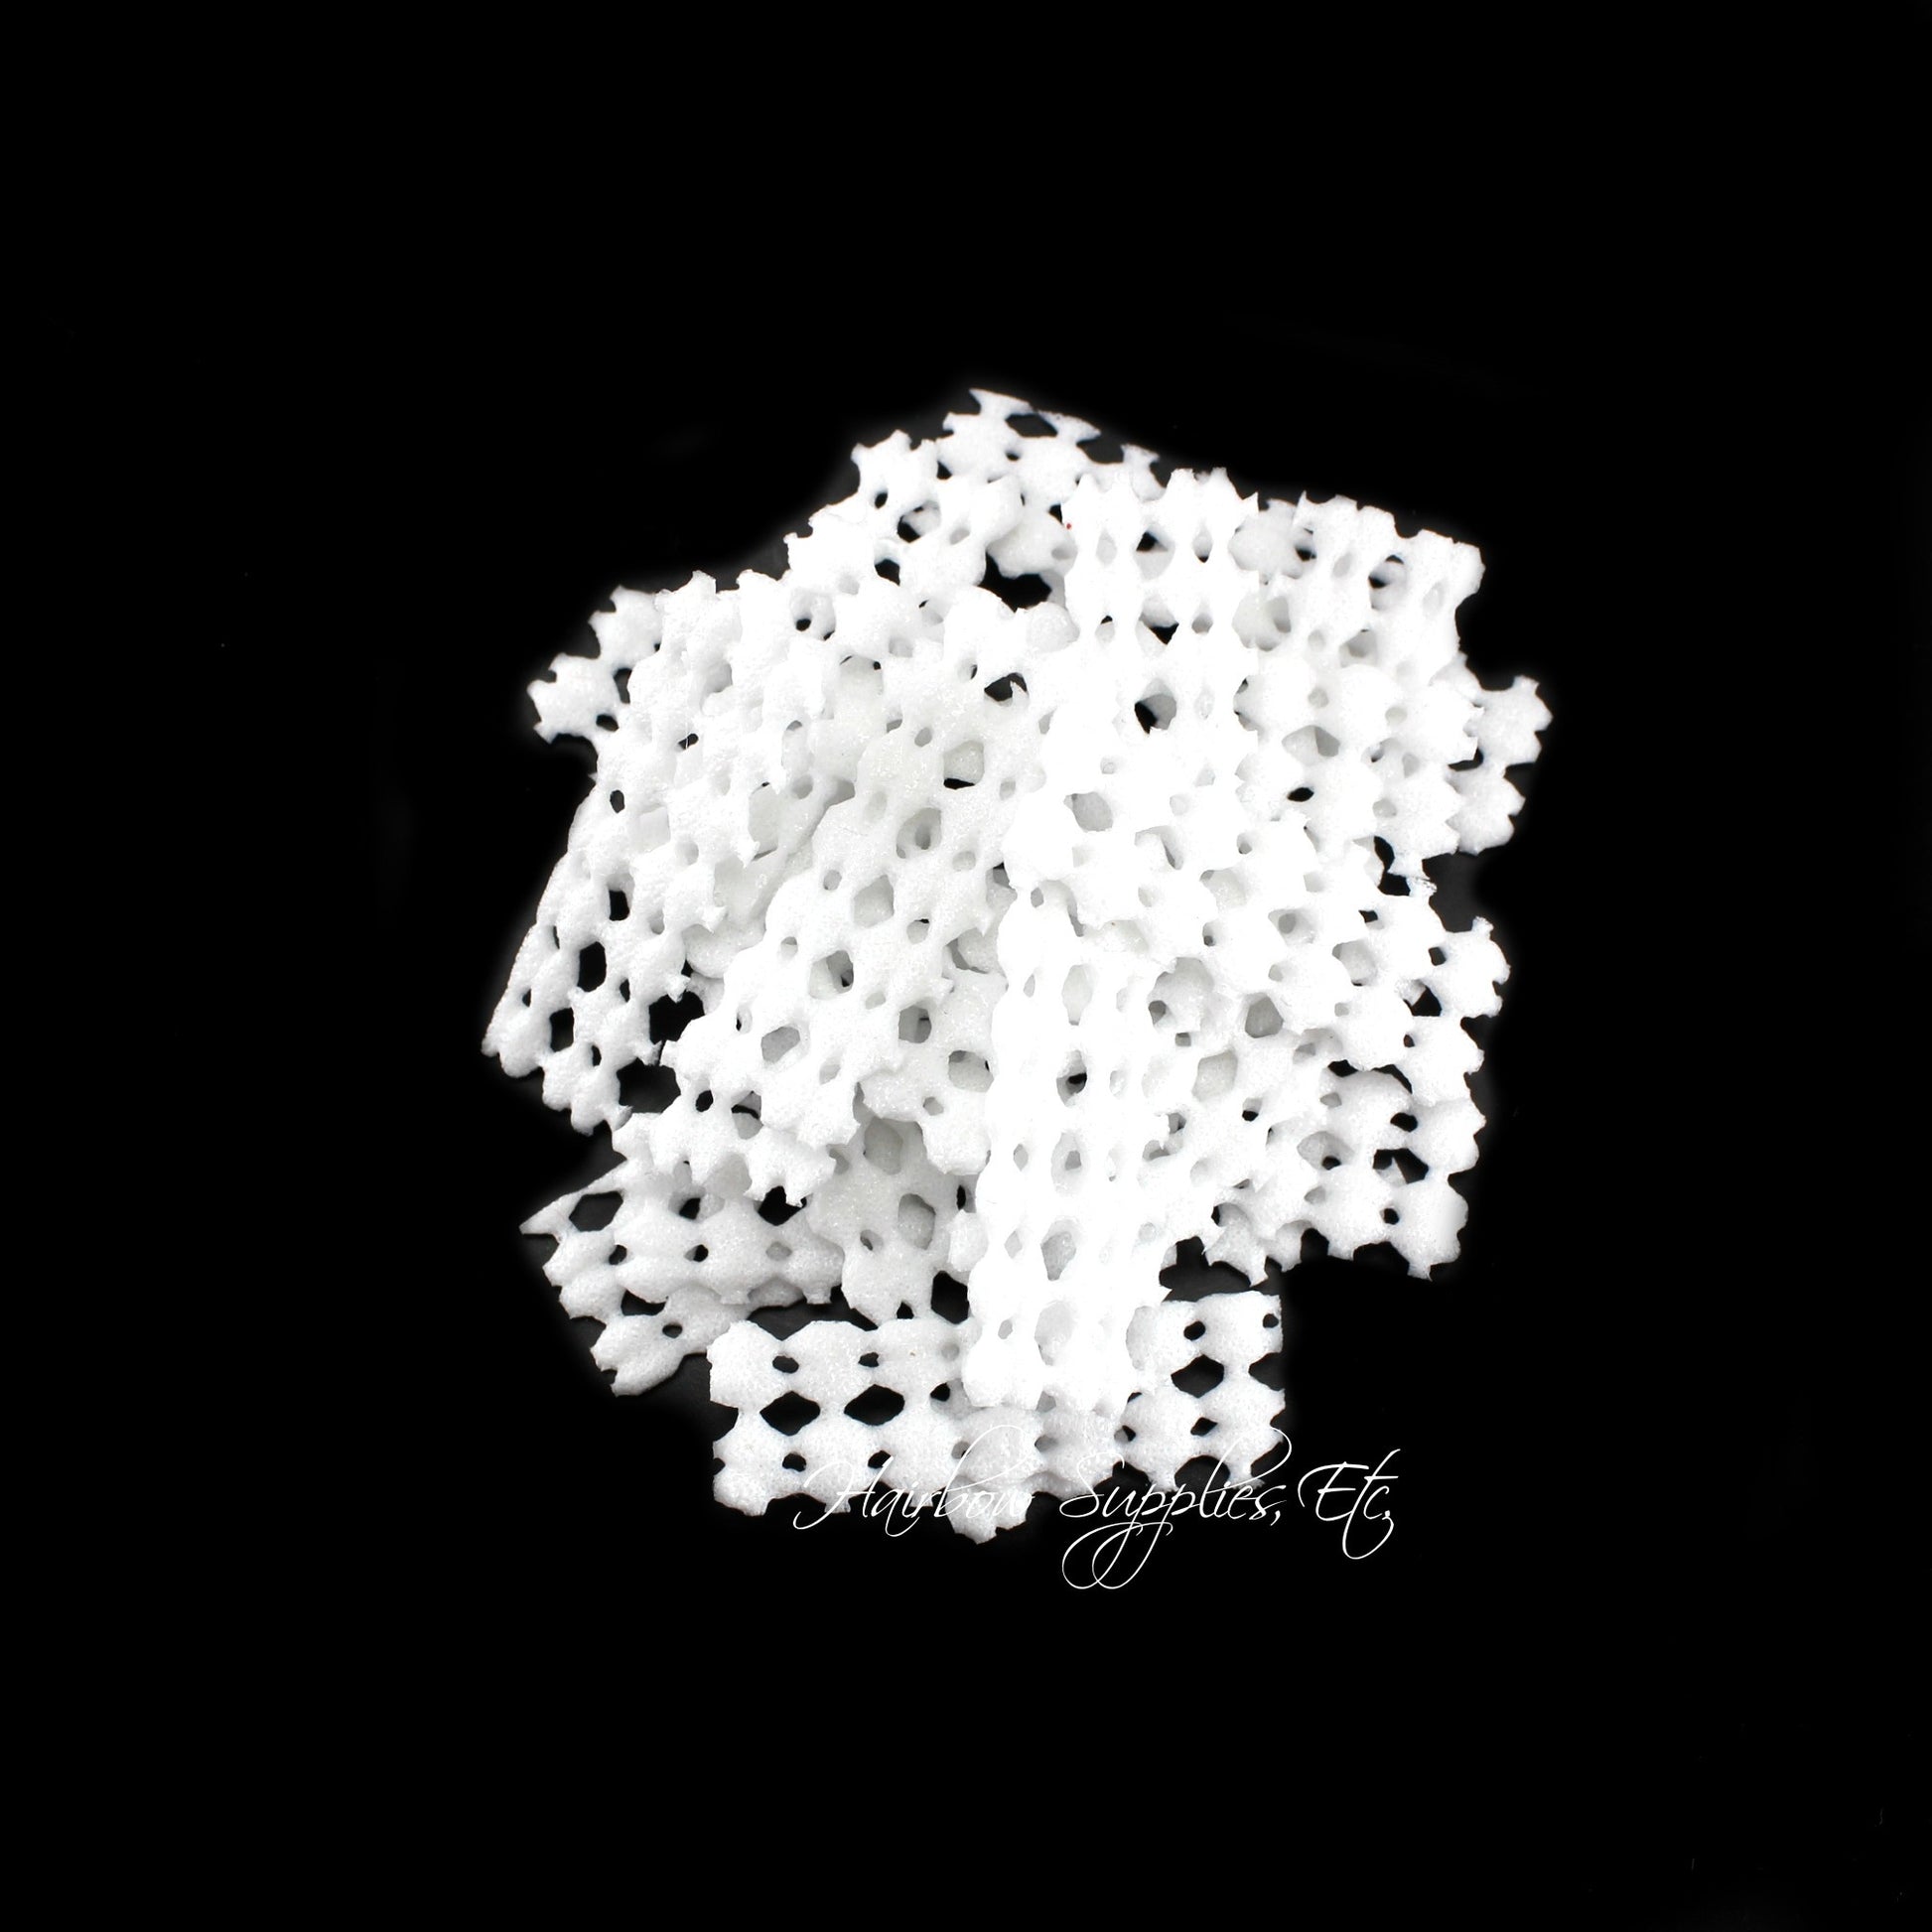 100 white non slip grips liners for alligator clips and hair bows